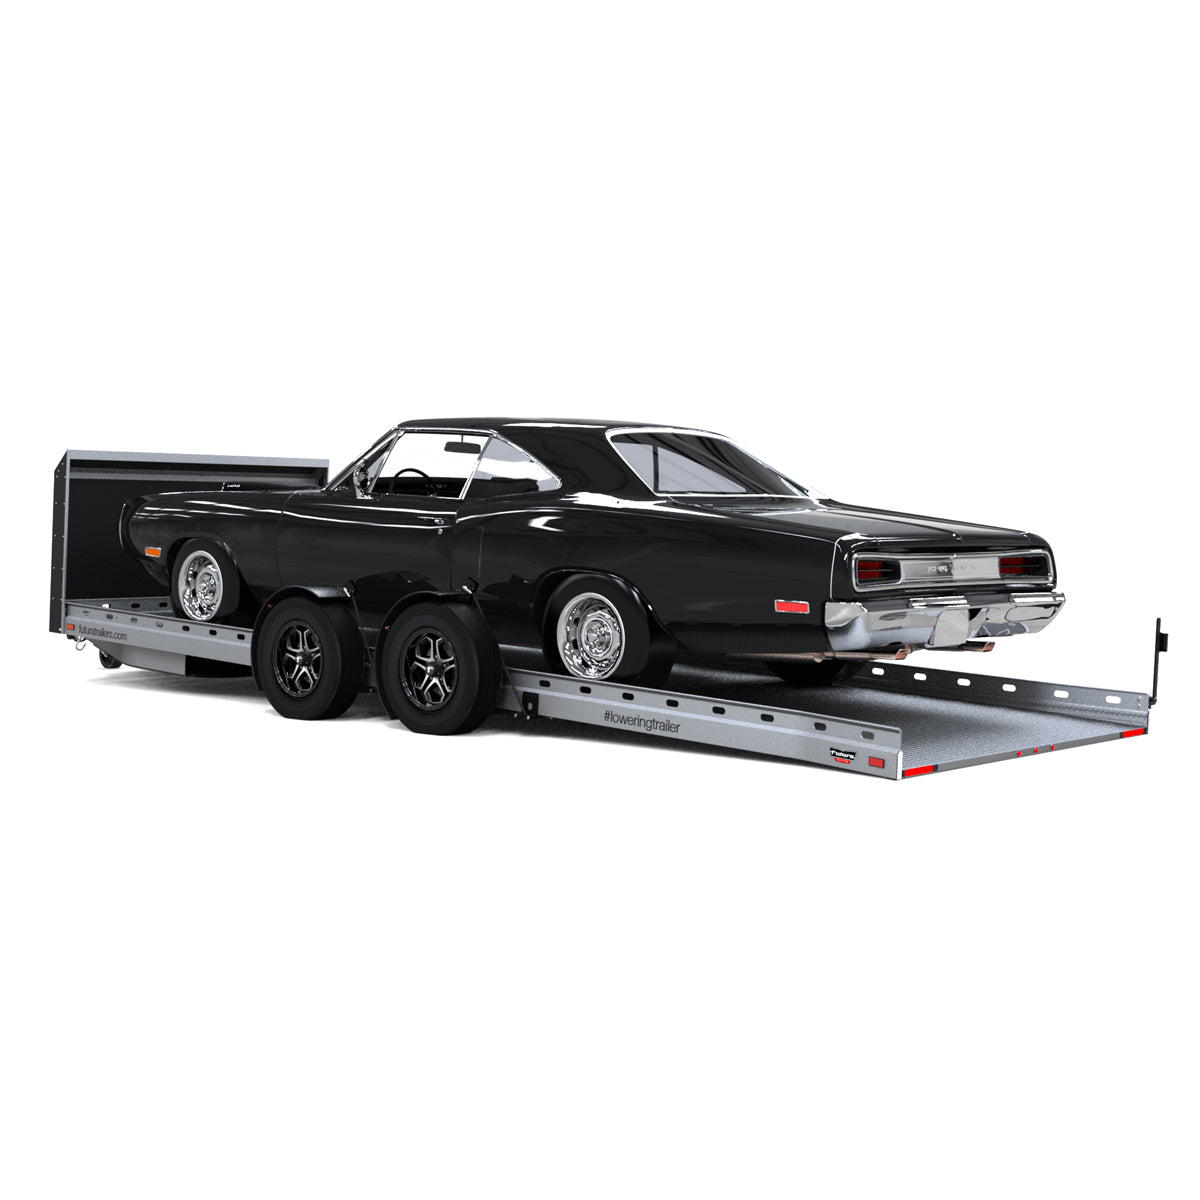 Pro Sport Lowering Trailer from $15,995*